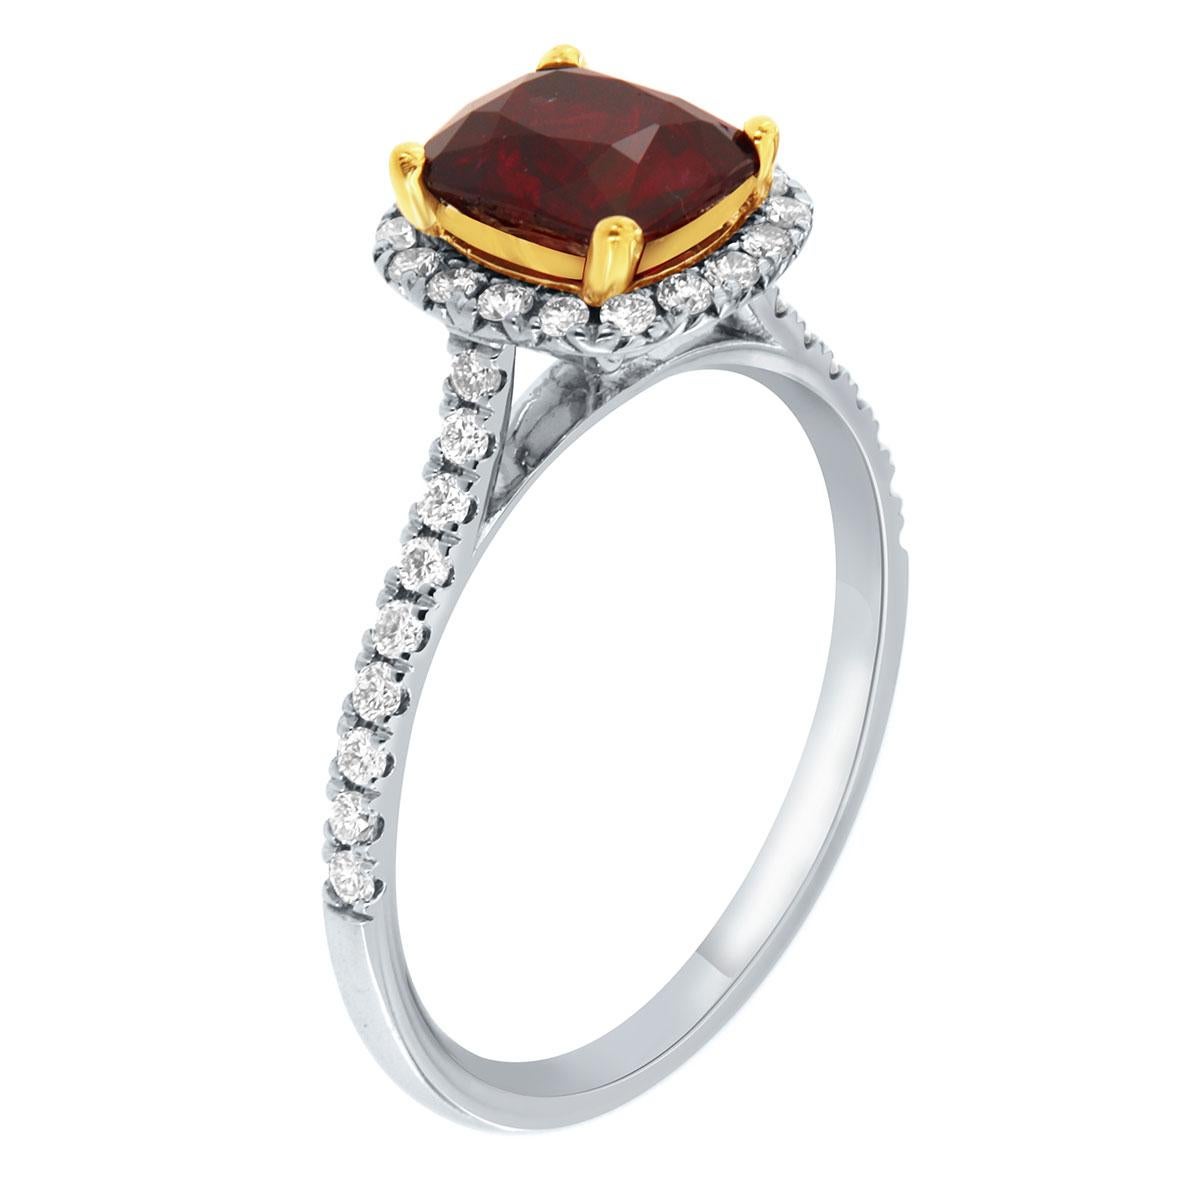 This 18K gold halo ring features perfectly matched brilliant round diamonds 1.3 mm each Micro-Prong set on a 1.7 mm wide shank. In the center of the ring is set one unique natural Ruby in an 18k Yellow gold cup. This exceptional 1.60 Carat Ruby